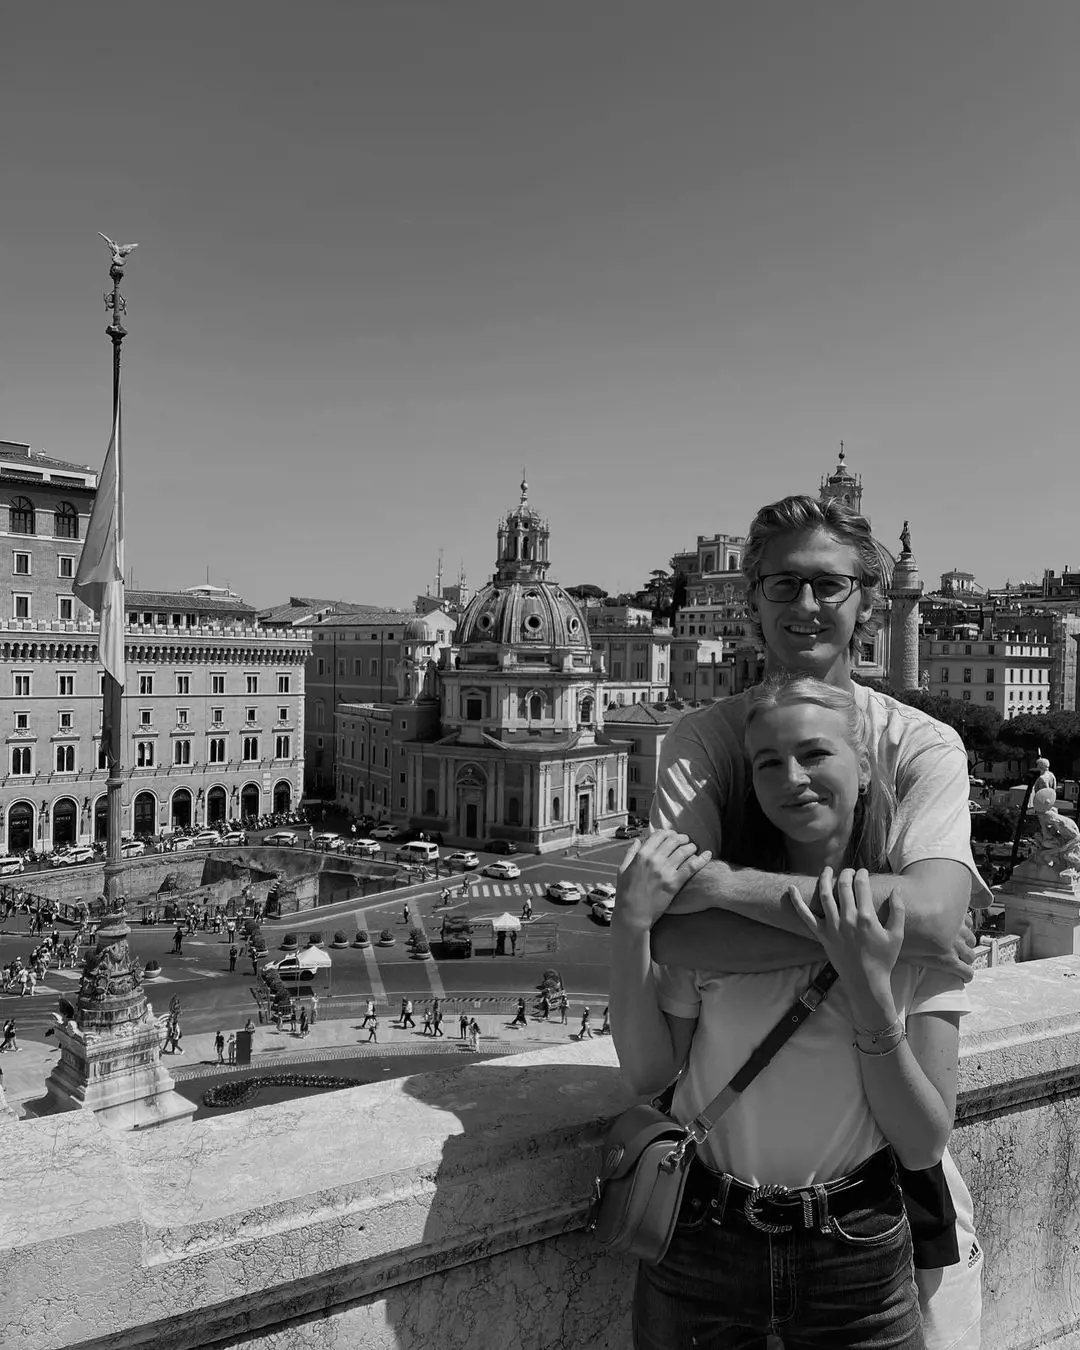 Cute couple Sebastian and Ivana explores the ancient city of Rome, Italy in Mat 2022 as they pose in front of a famous catholic church Santa Marie di Loreto